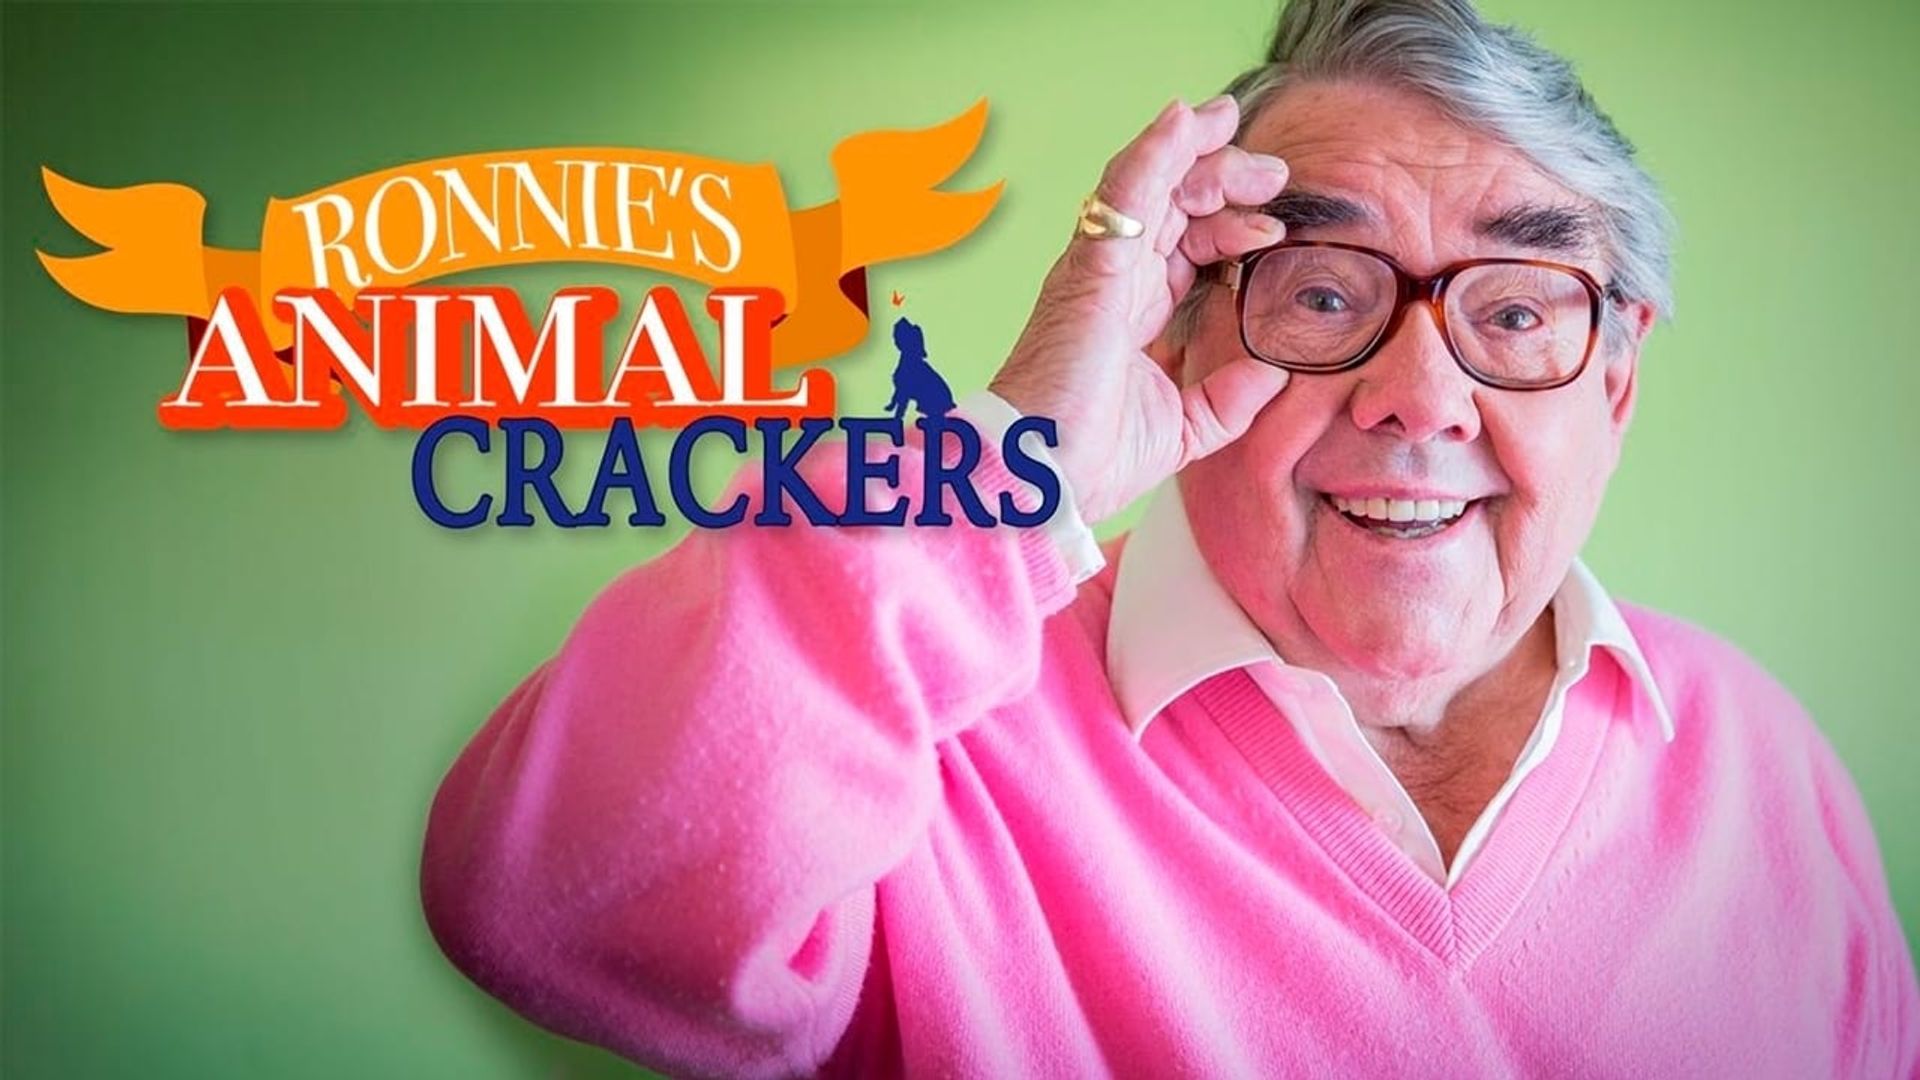 Ronnie's Animal Crackers background